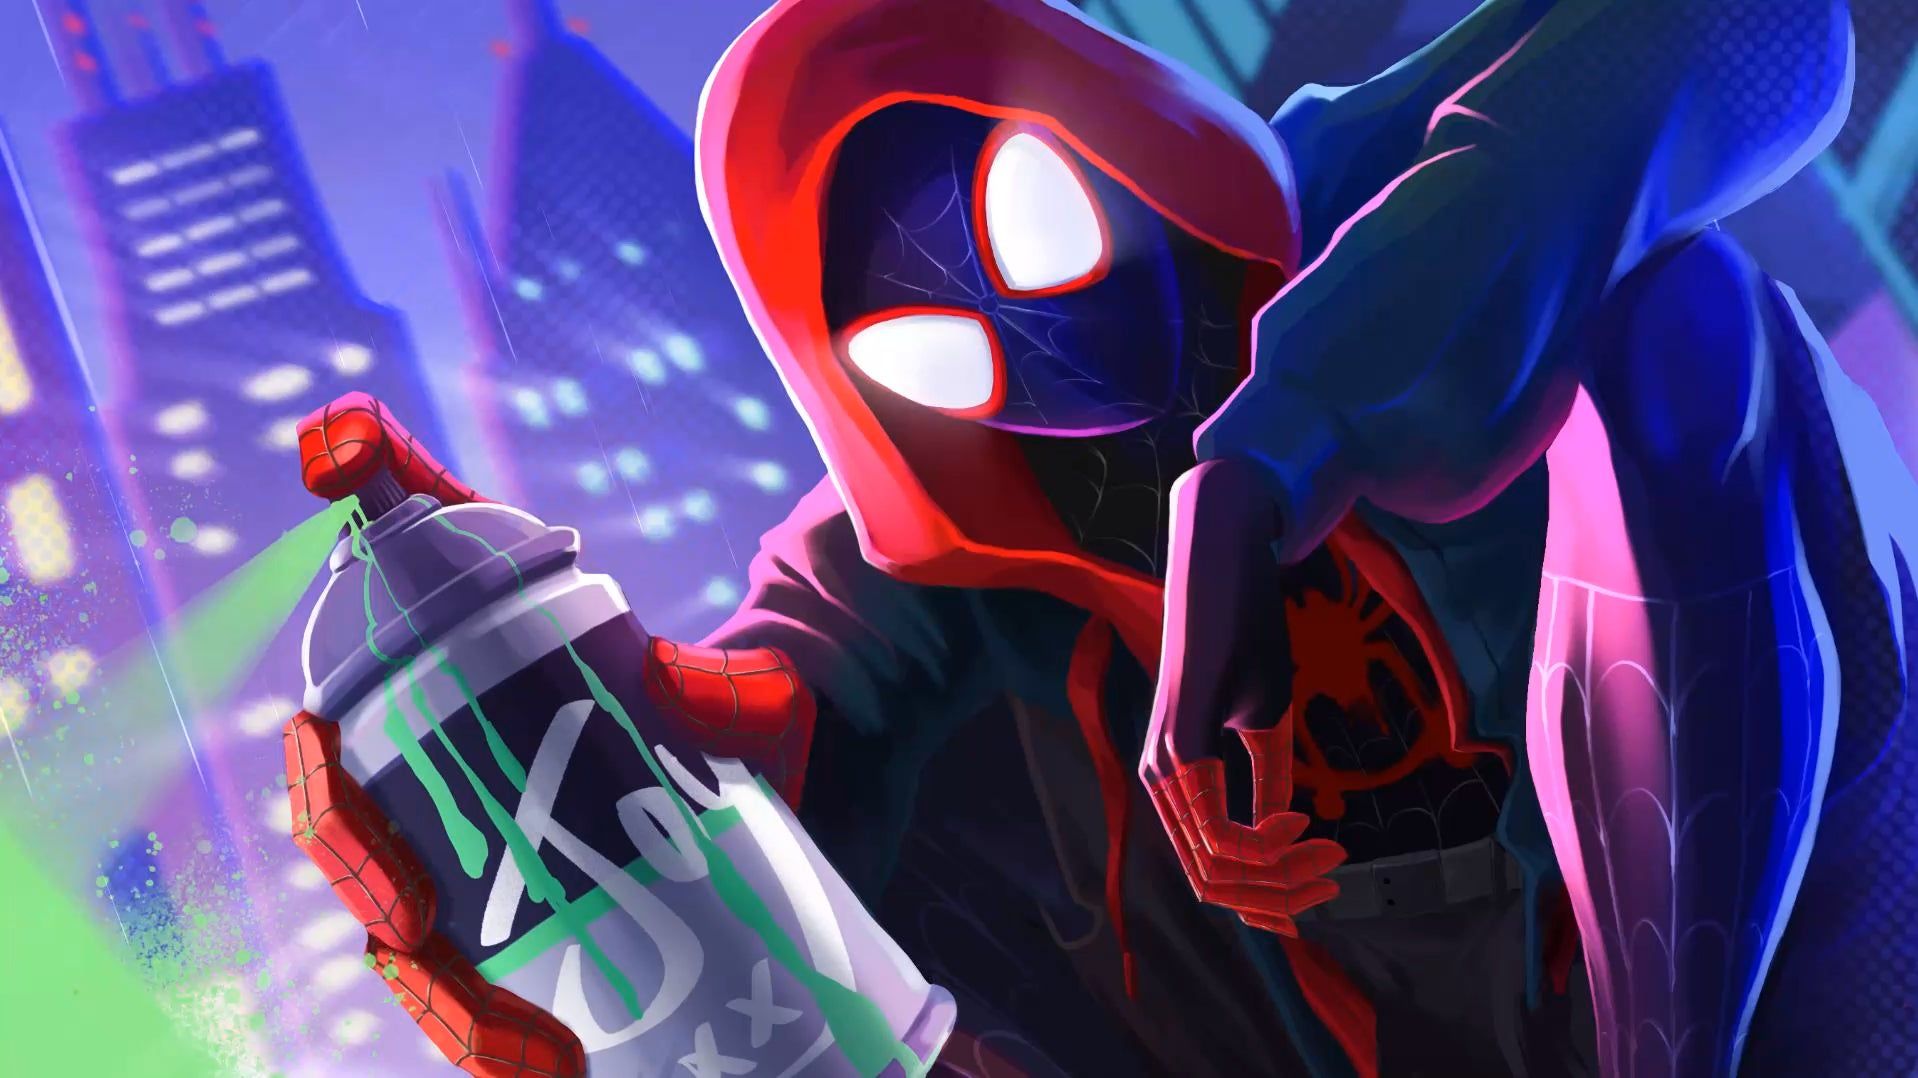 Spider Man Miles Morales With A Spray Can. Animated Responsive 2K. By Dub5ty (more Info In Comments)